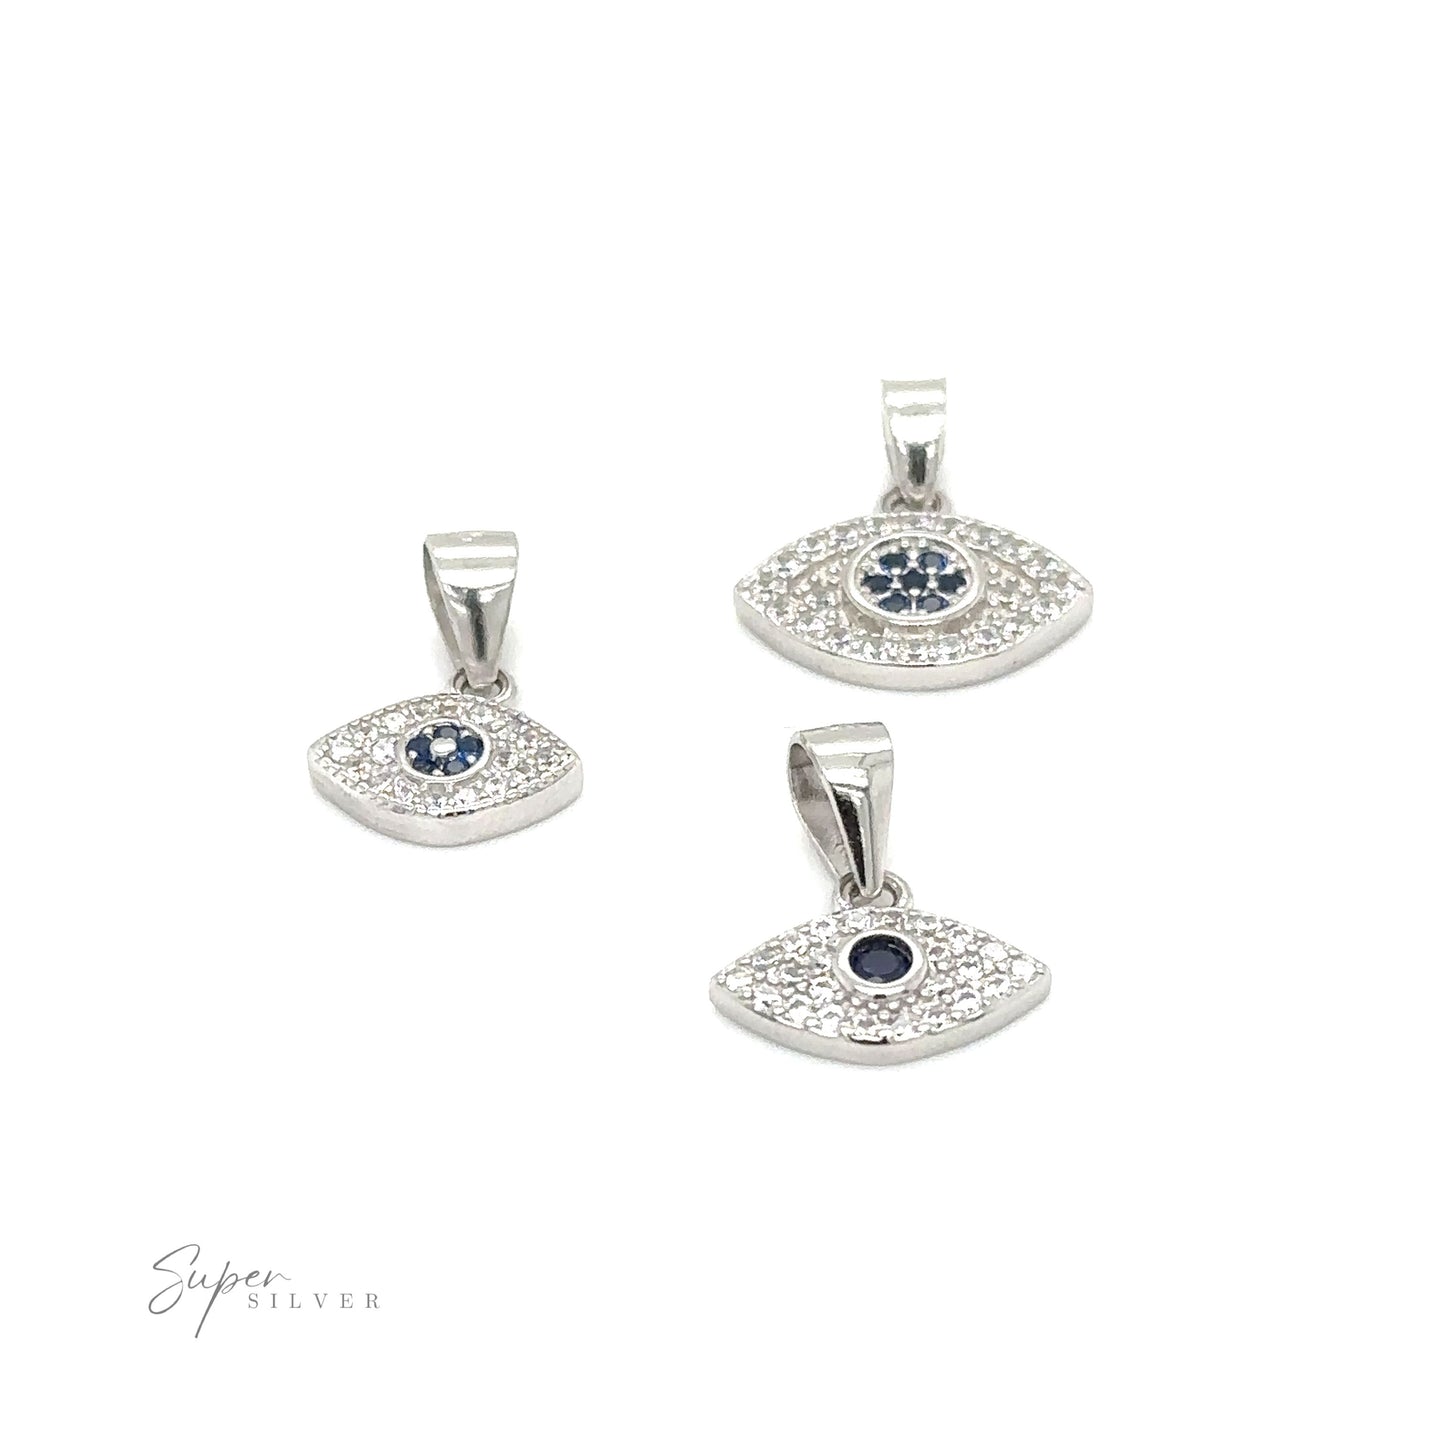 Three Evil Eye Pave Cubic Zirconia Charms adorned with pave cubic zirconia.